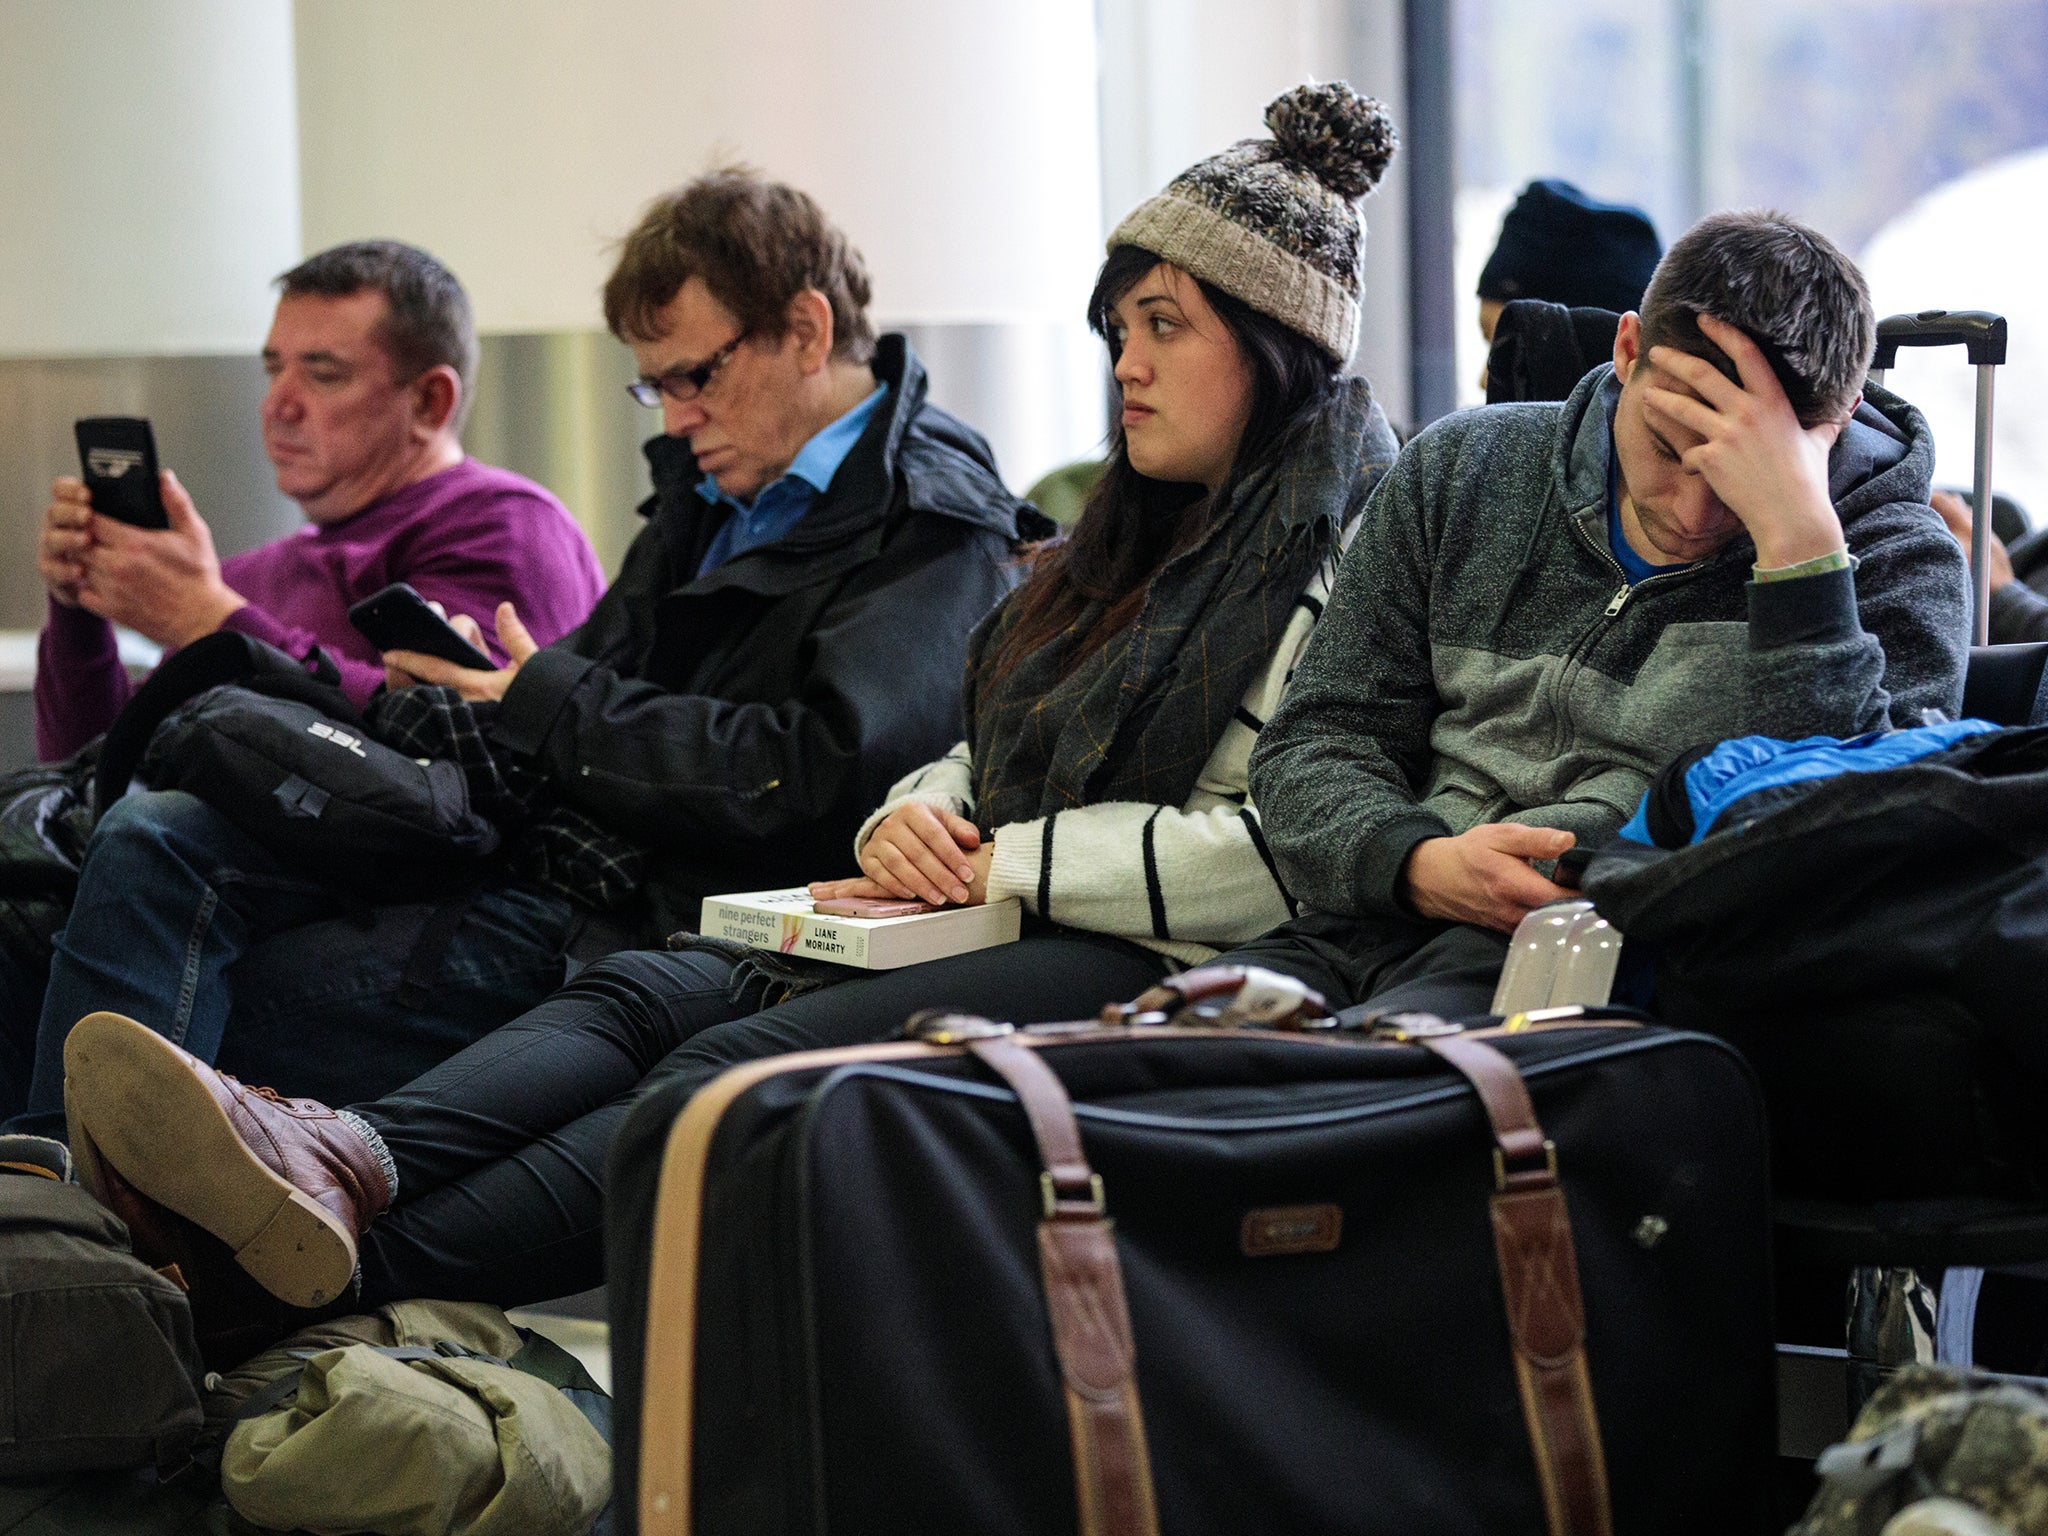 Passengers wait in the South Terminal building at London Gatwick Airport after flights resumed.